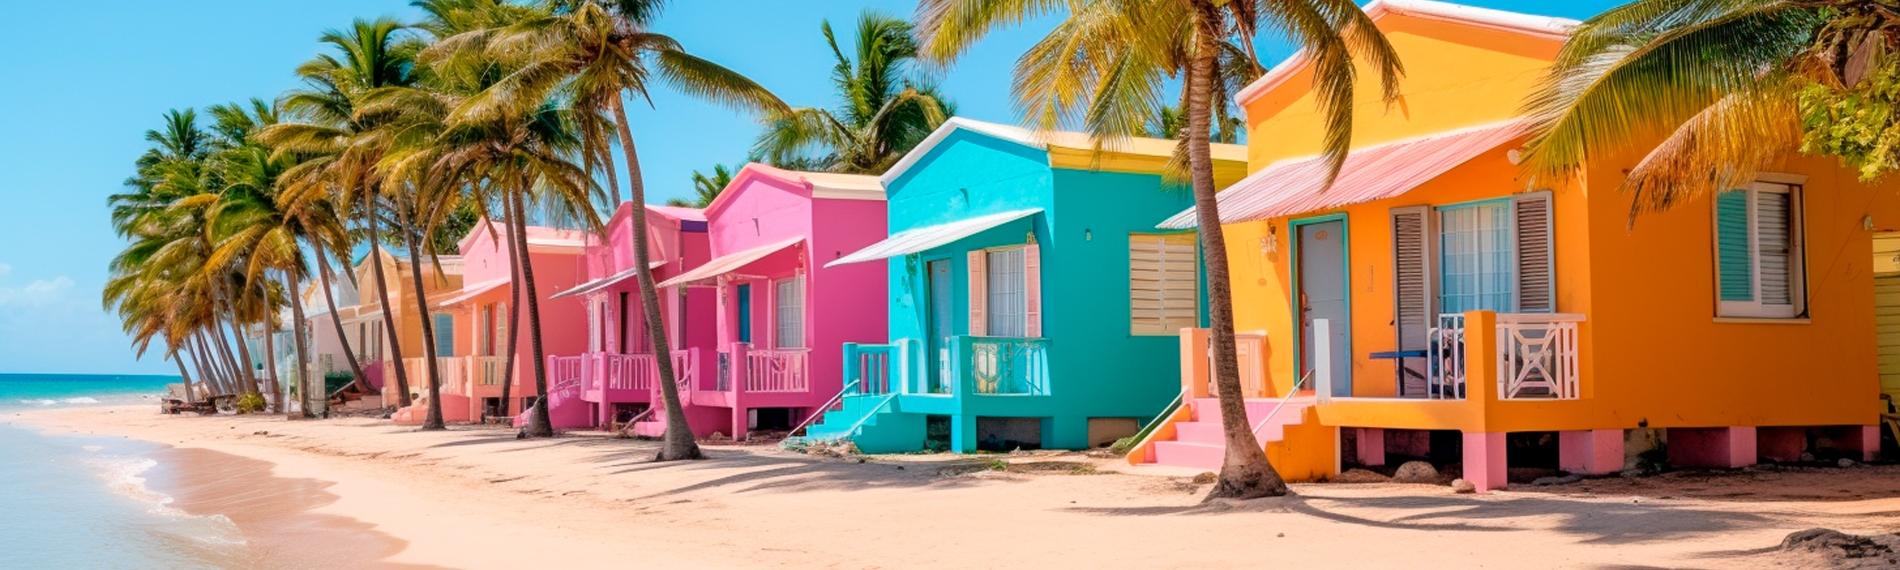 A group of colourful houses on a Dominican Republic beach